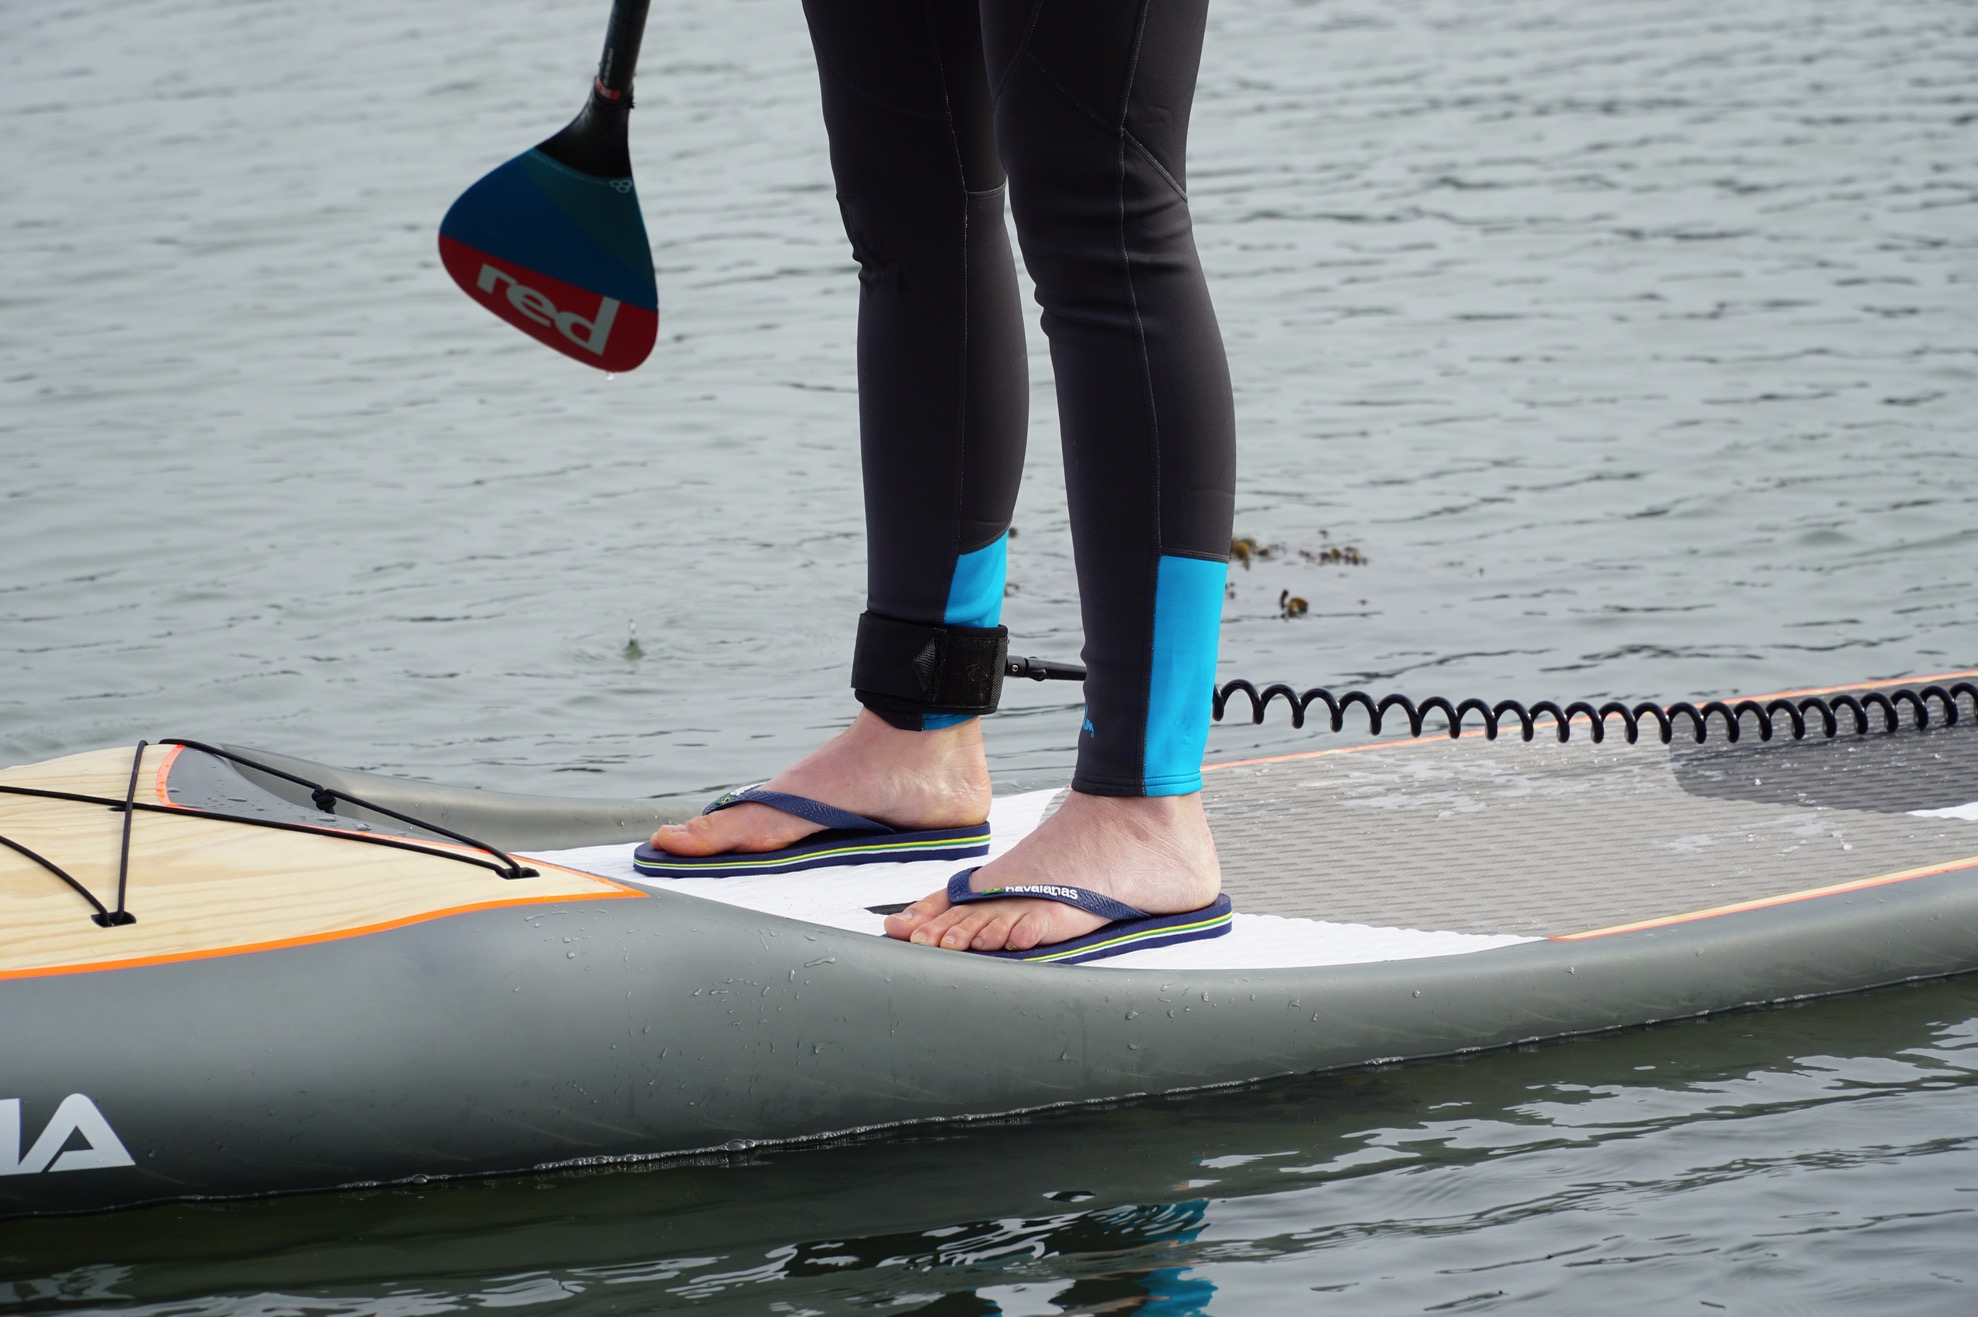 What to wear on your feet paddleboarding? - flip flops